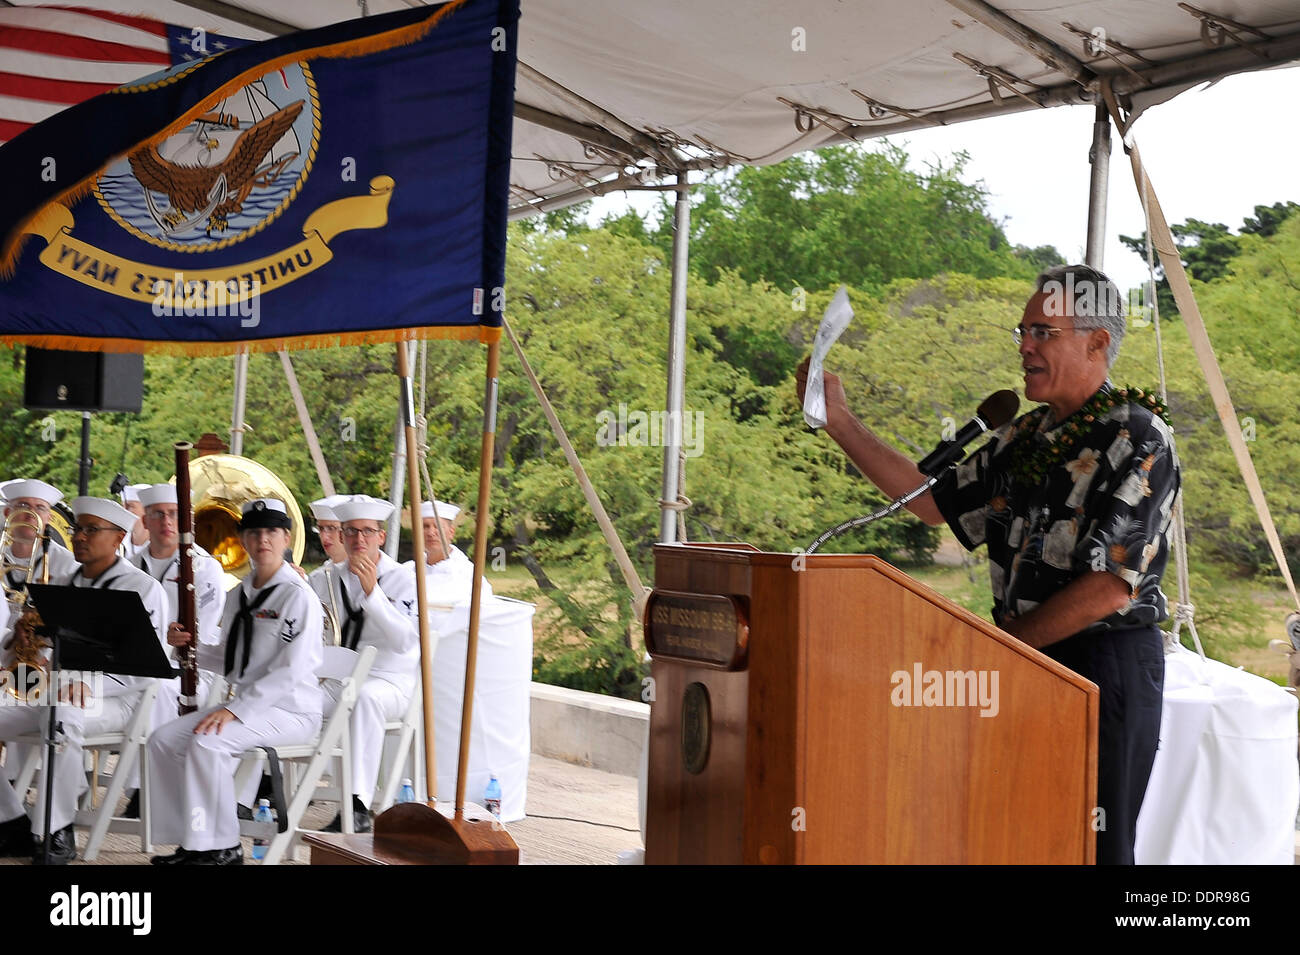 Captain Michael Lilly, USN (Ret.), shares some of his family’s memories of the Nimitz family and their time in Hawaii as part of the USS Missouri Memorial Association 68th anniversary celebration commemorating The End of World War II, Monday, Sept. 2, at Stock Photo